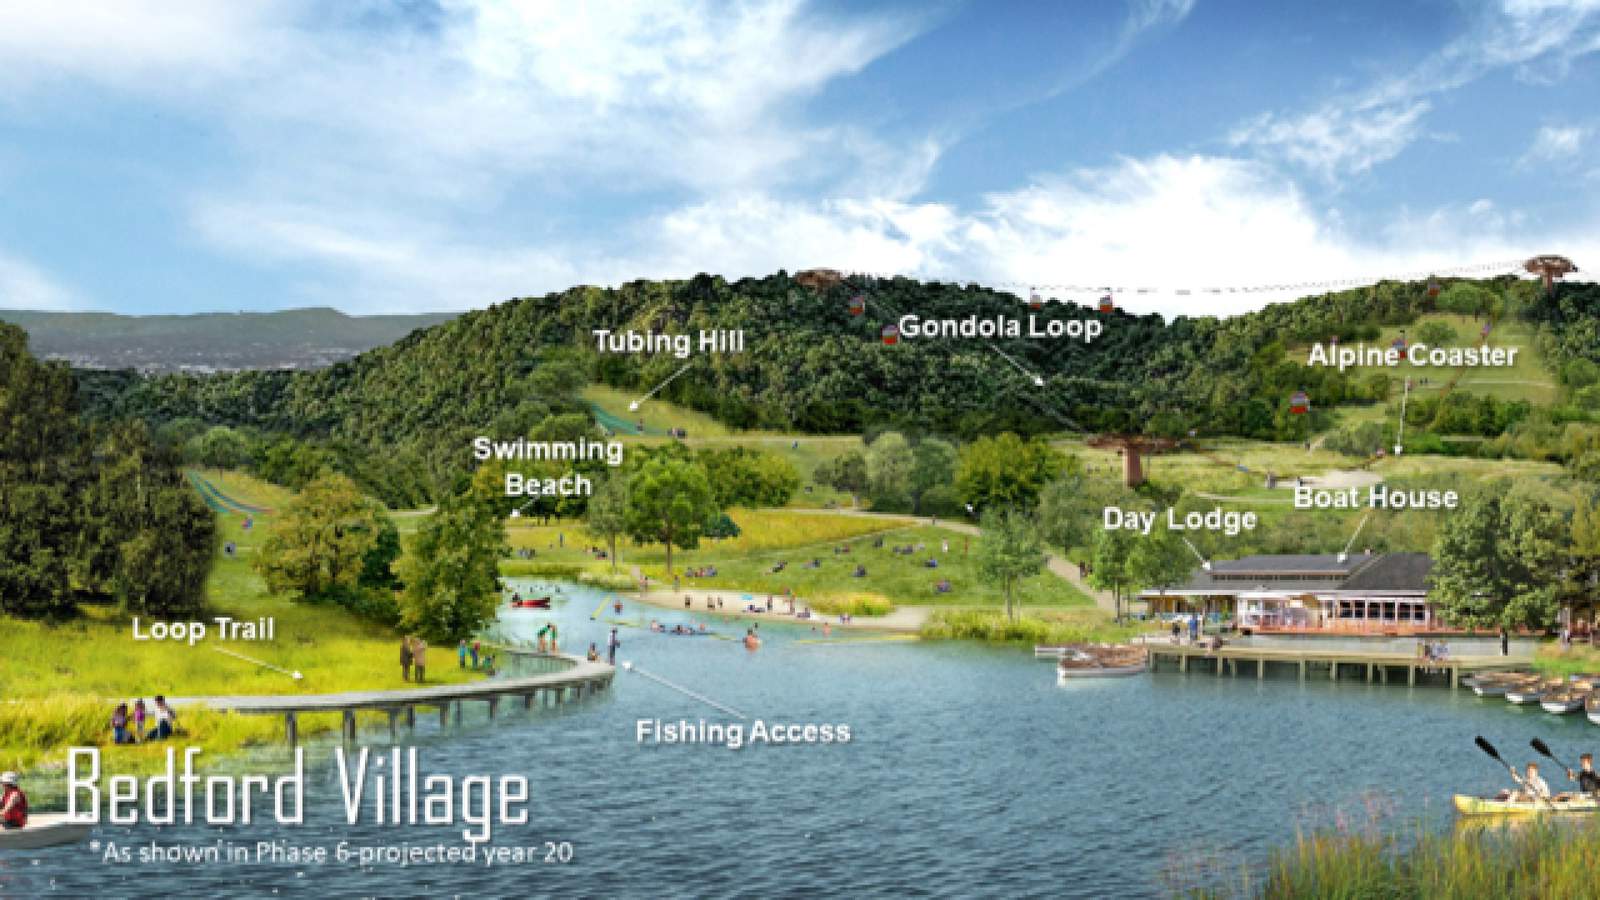 Explore Park planning expansion of outdoor adventures in Bedford County